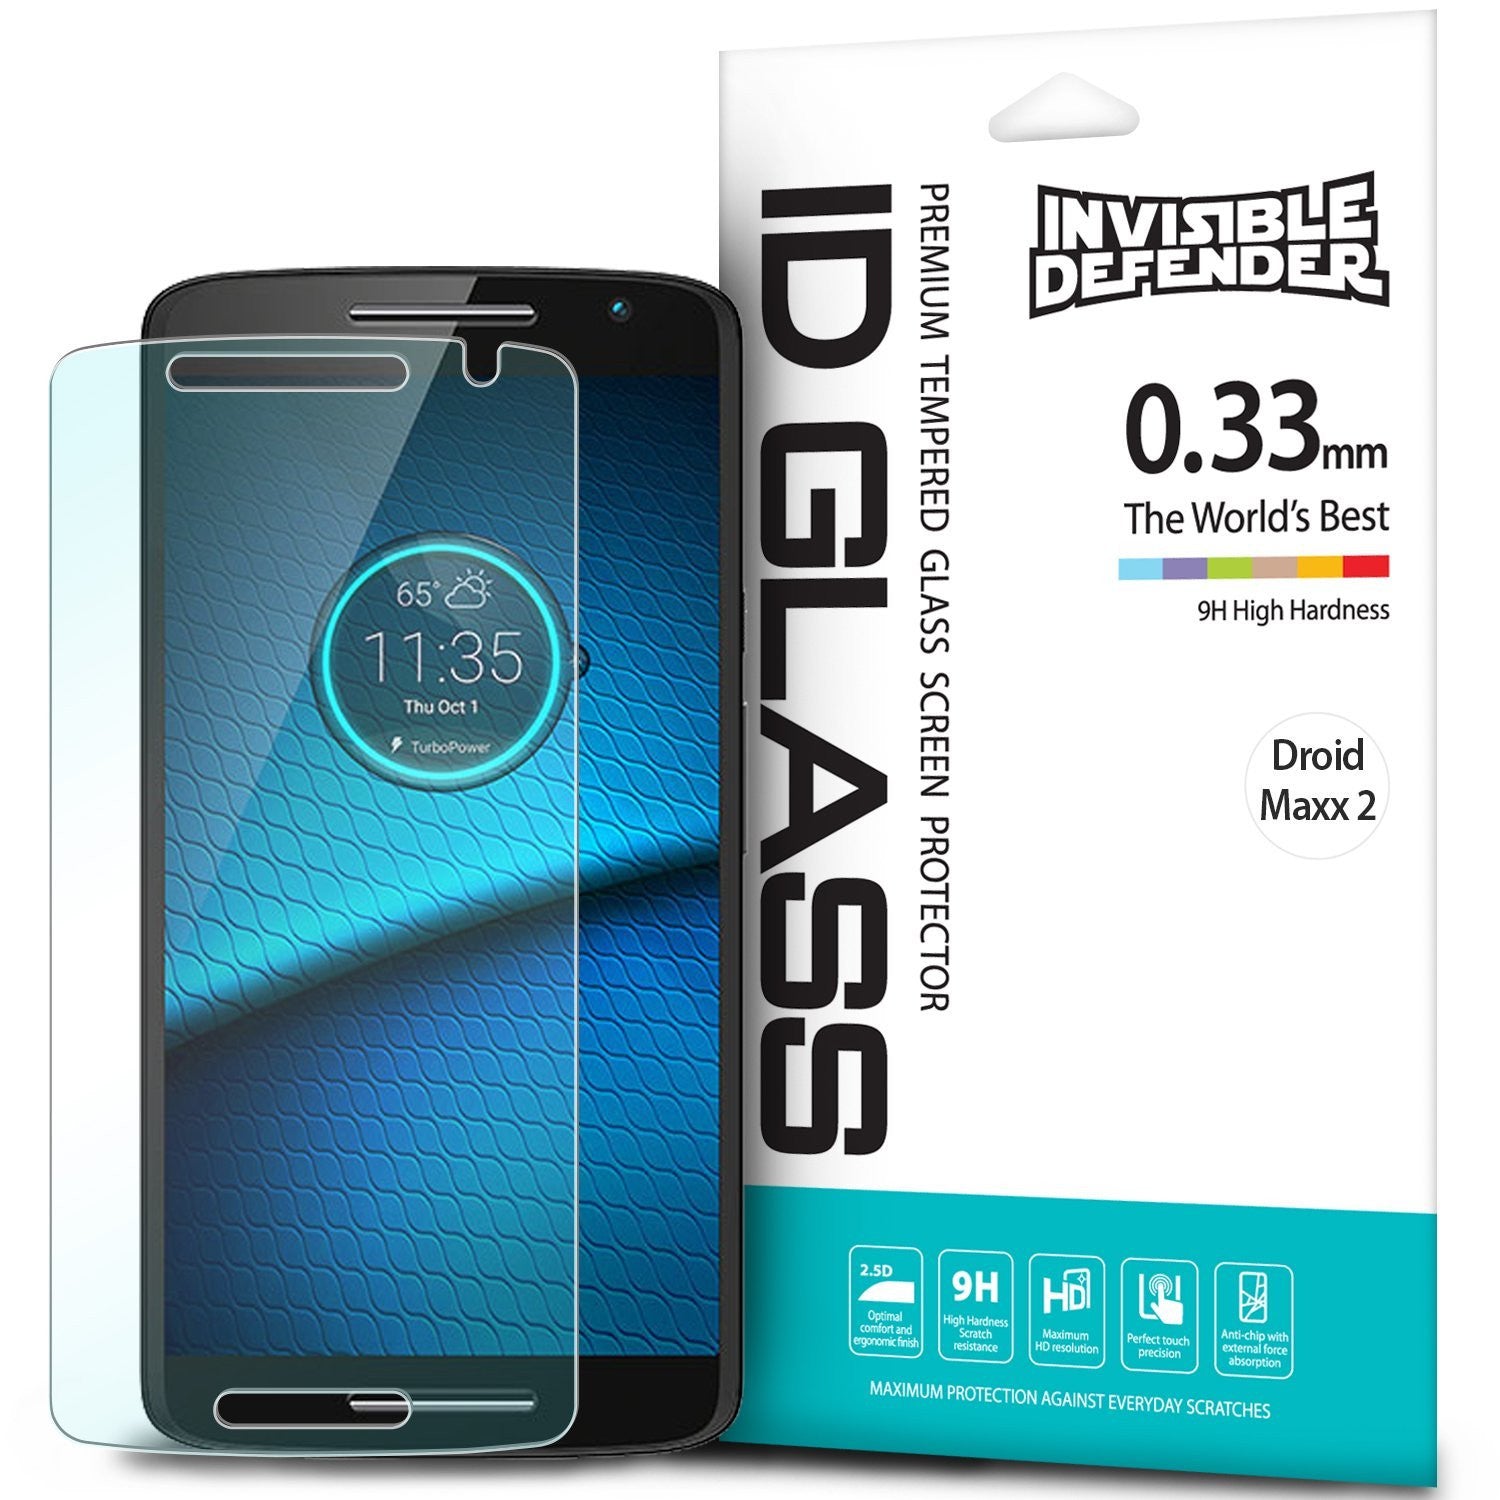 droid maxx 2 invisible defender tempered glass screen protector